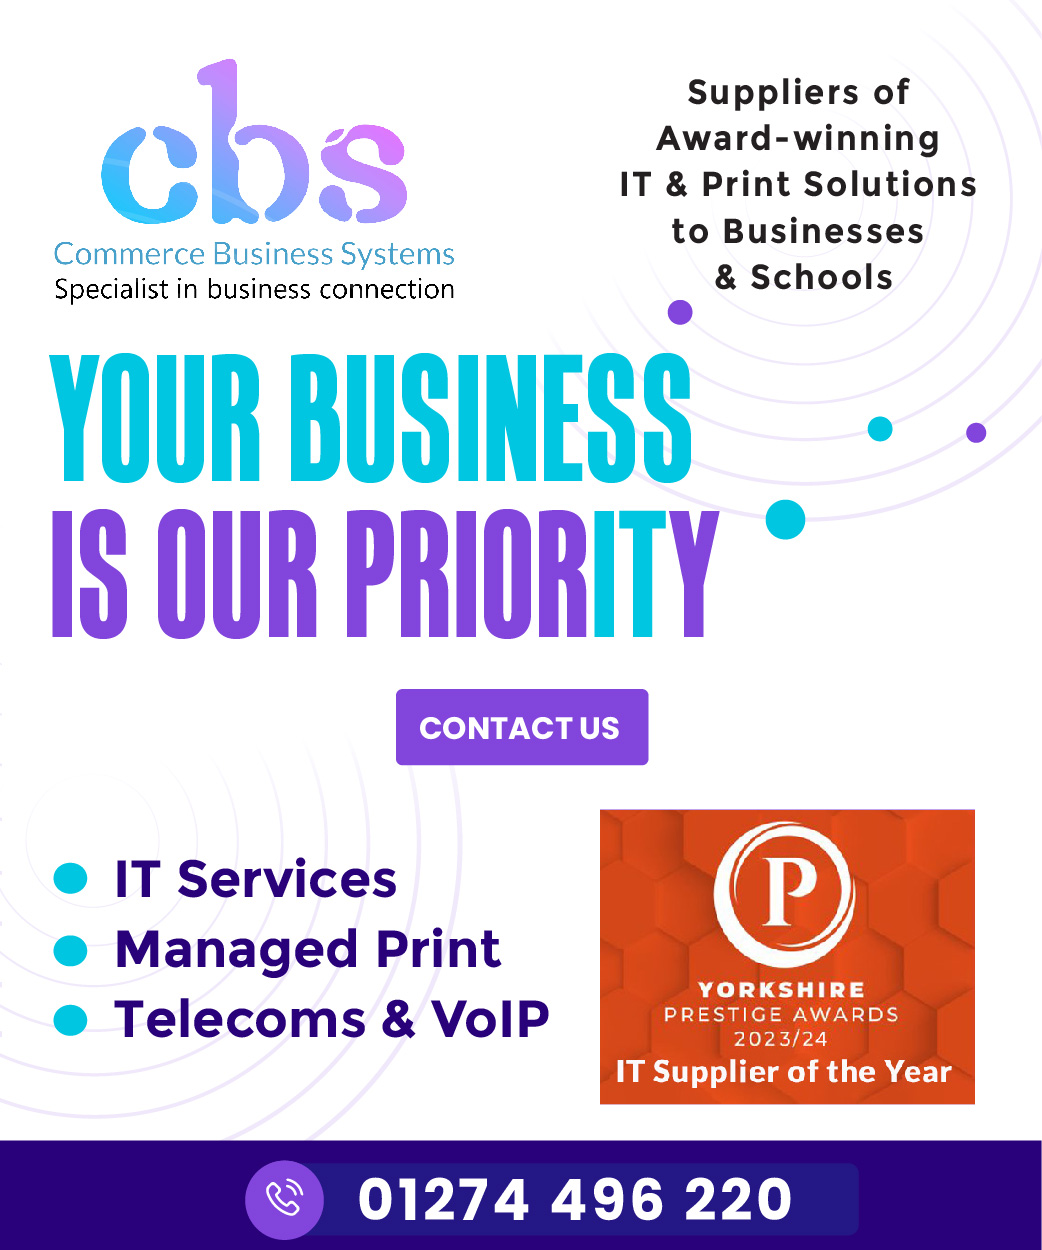 Commerce Business Systems Ltd - Front page info panel showing a your business is our priority and the services we provide, including IT, managed print and Telecomms.